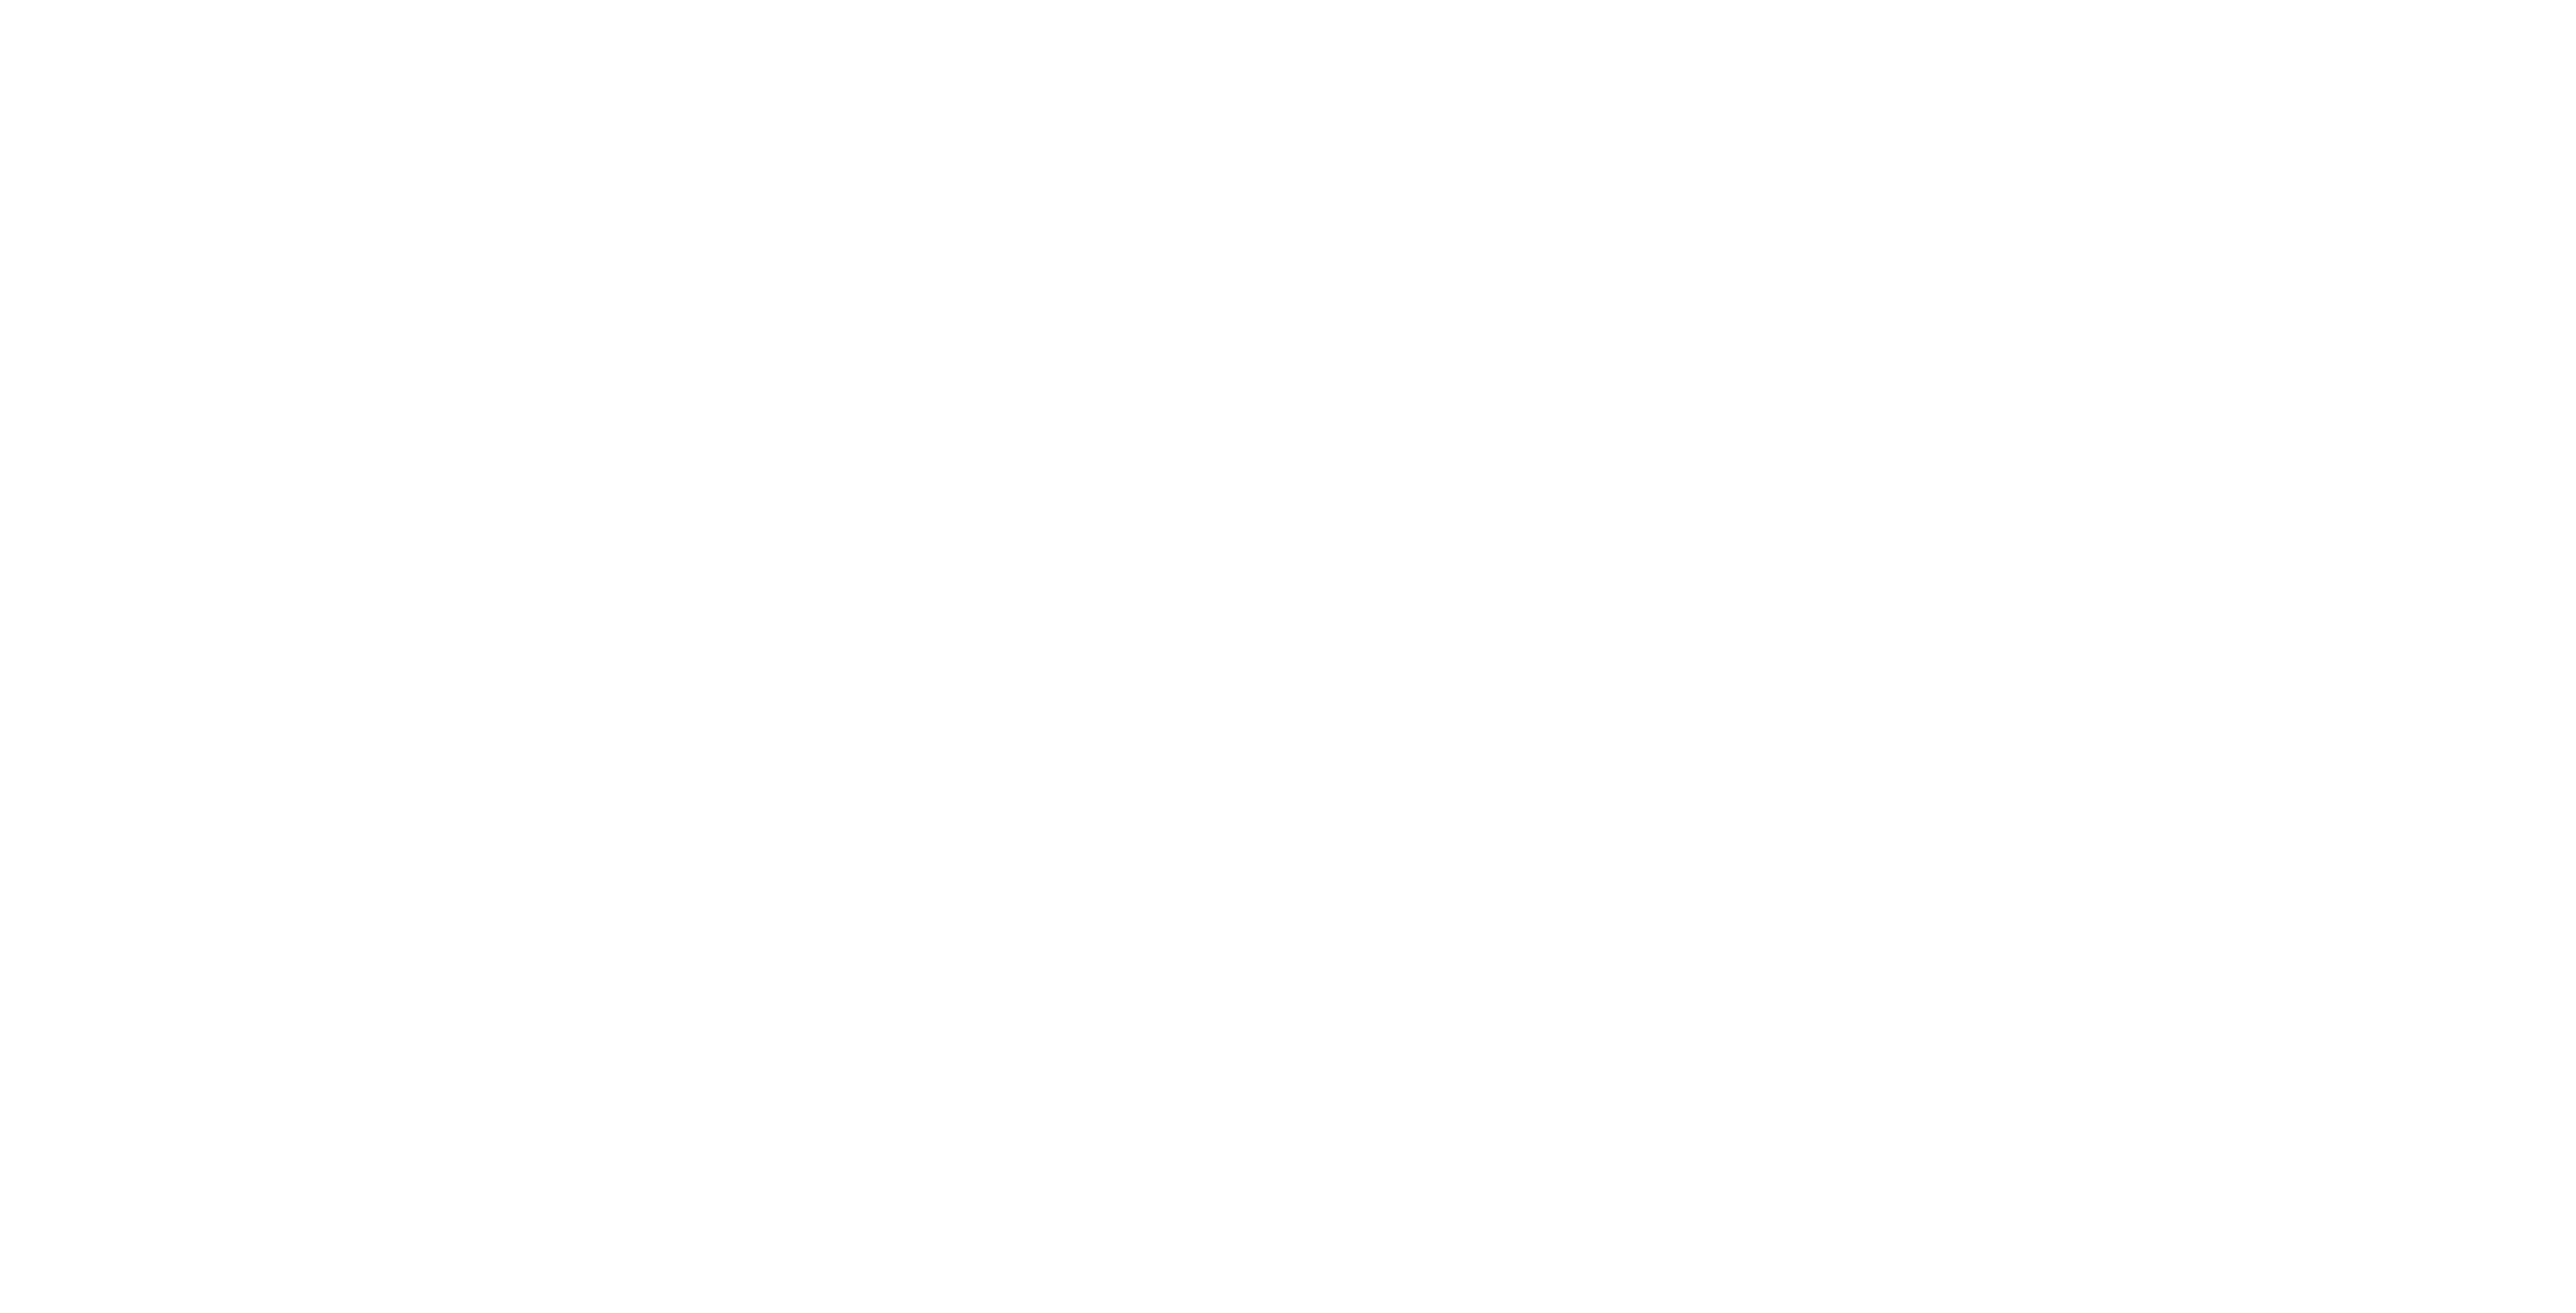 the Mind Blowing Performance ​and Using Marketing Hi-Tech​